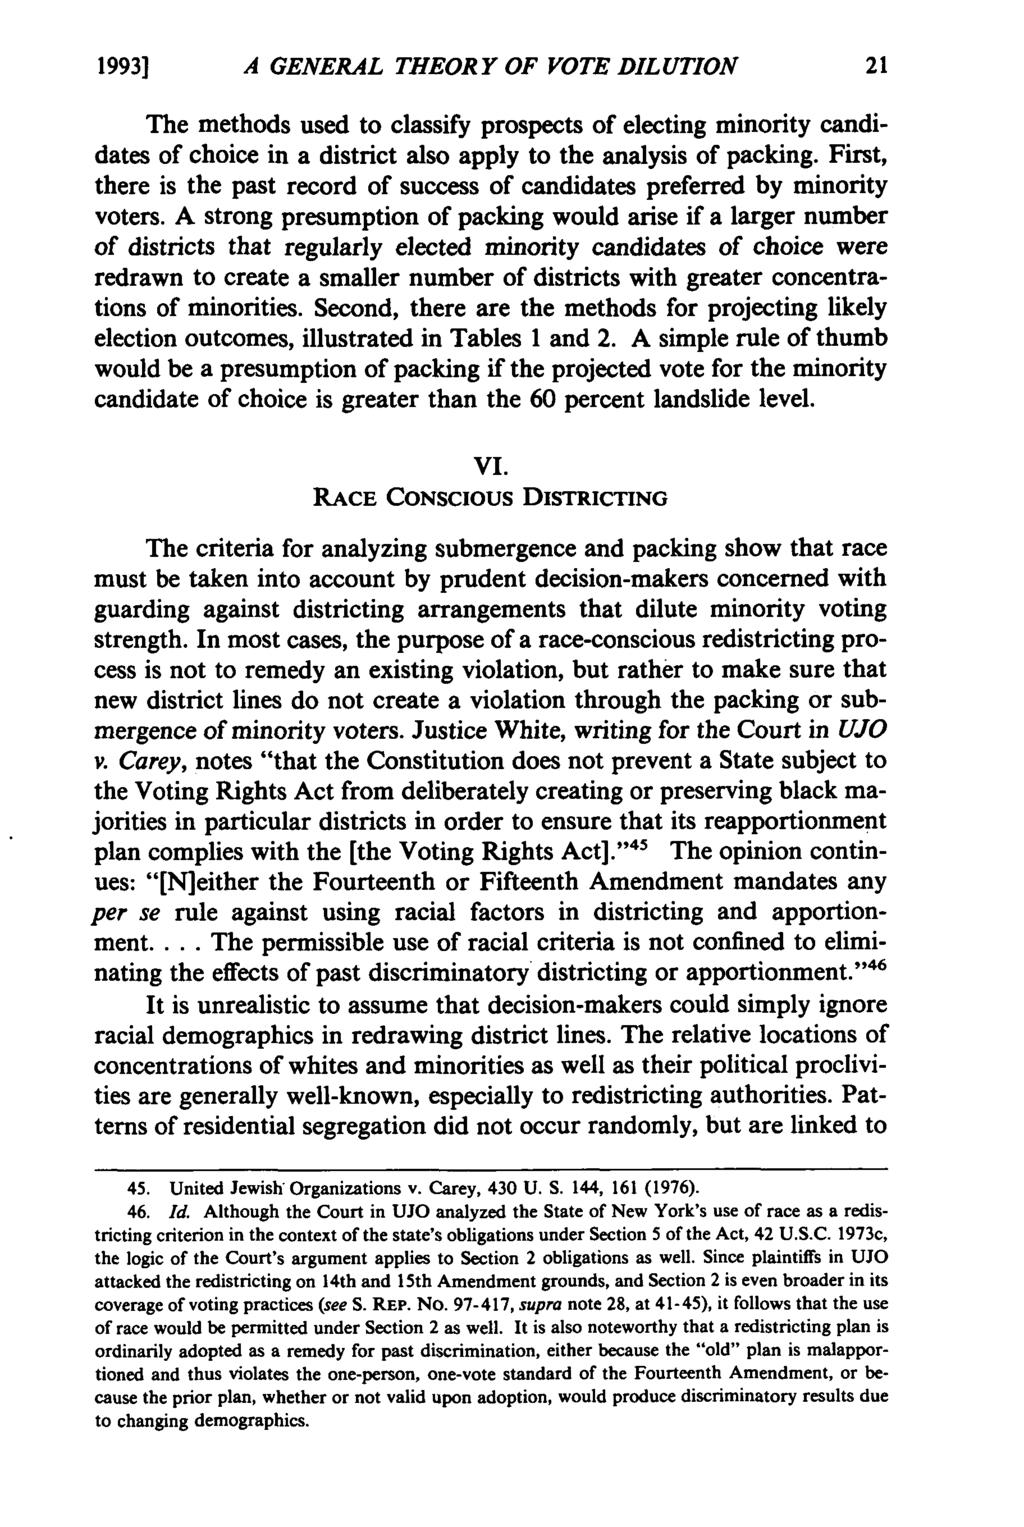 1993] A GENERAL THEORY OF VOTE DILUTION The methods used to classify prospects of electing minority candidates of choice in a district also apply to the analysis of packing.